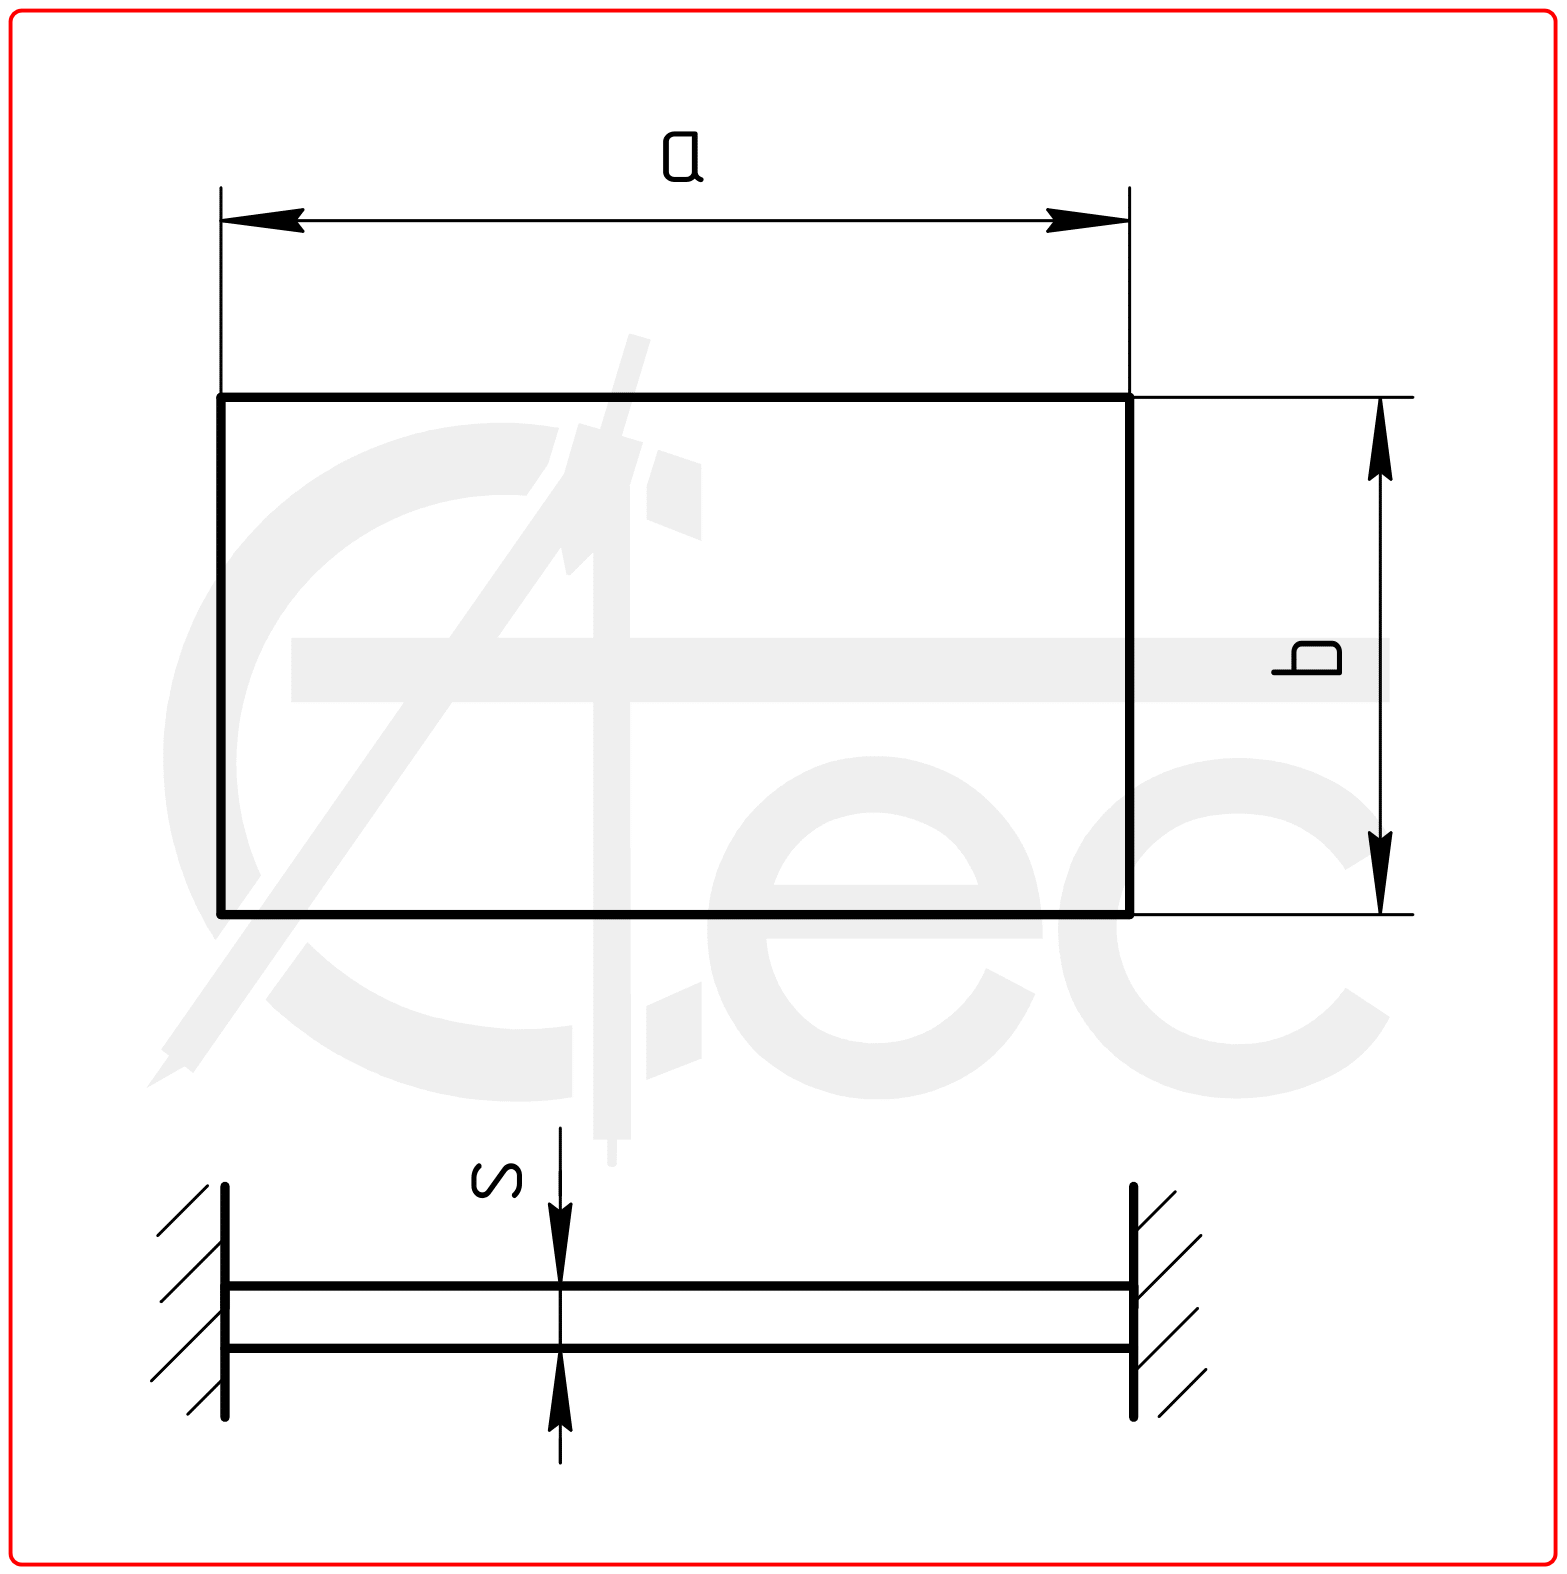 Calculation of Natural frequency of rectangular plate with fixed edges